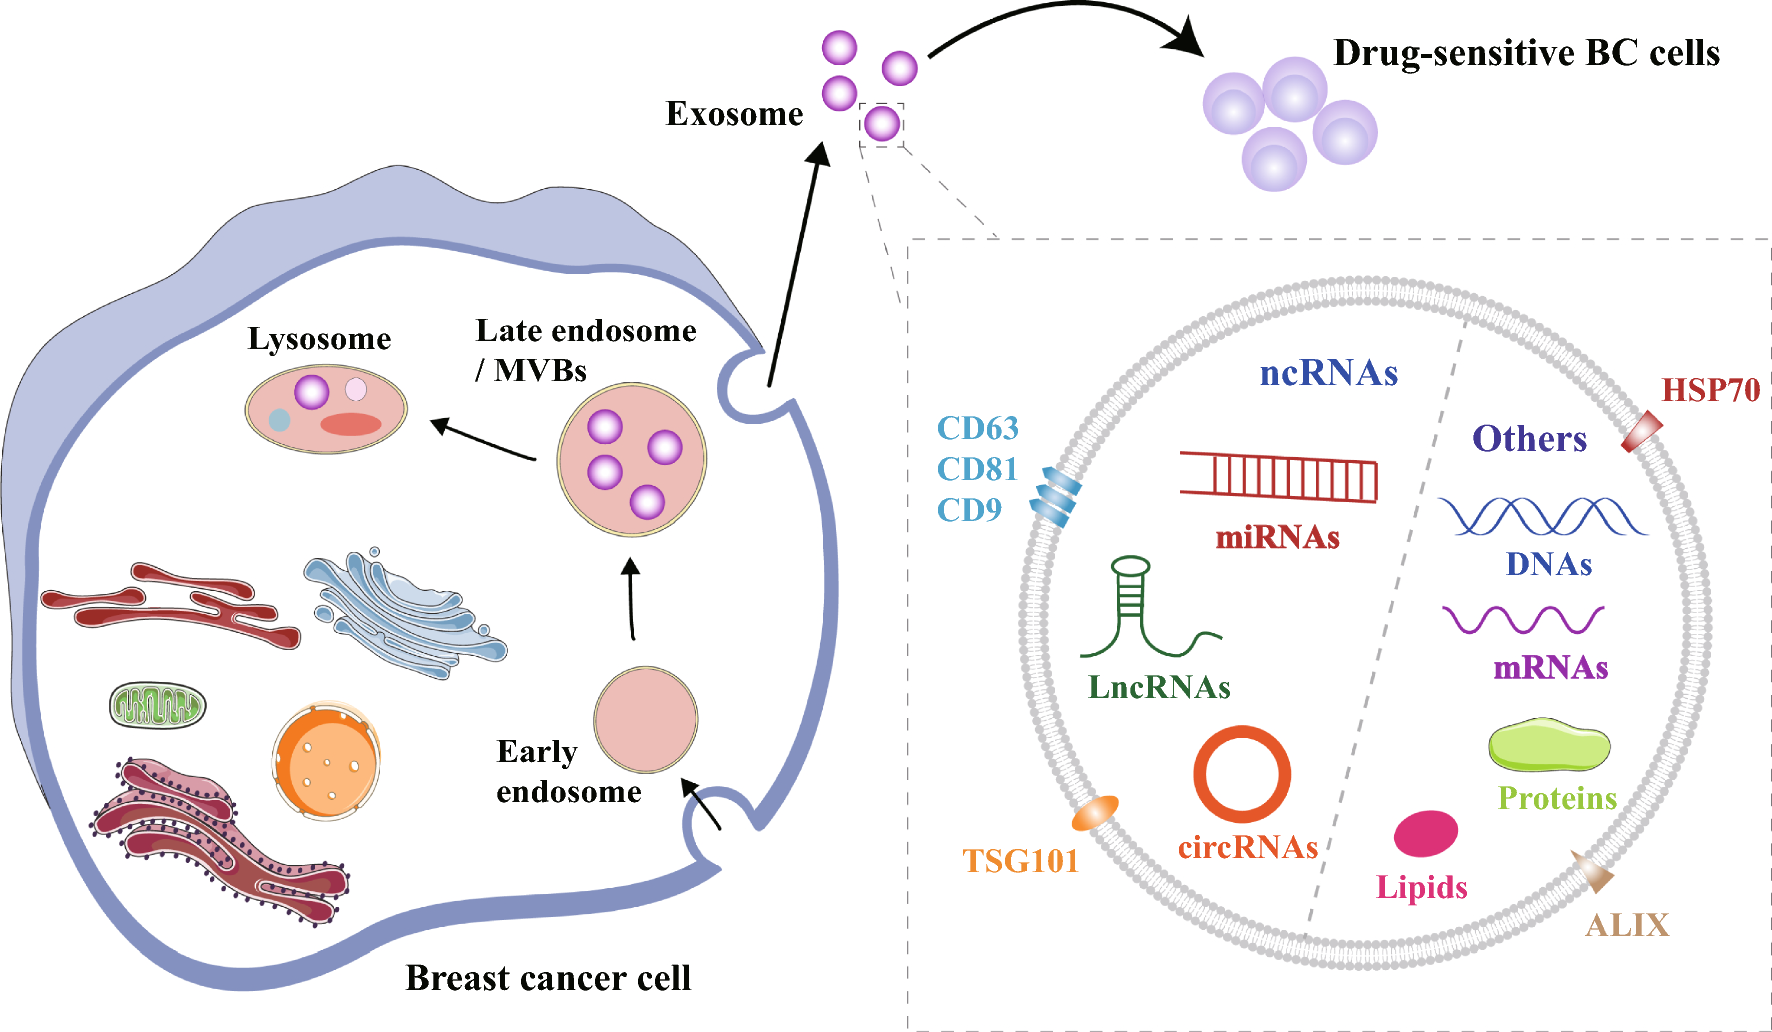 Drug resistance in breast cancer is based on the mechanism of exocrine non-coding RNA